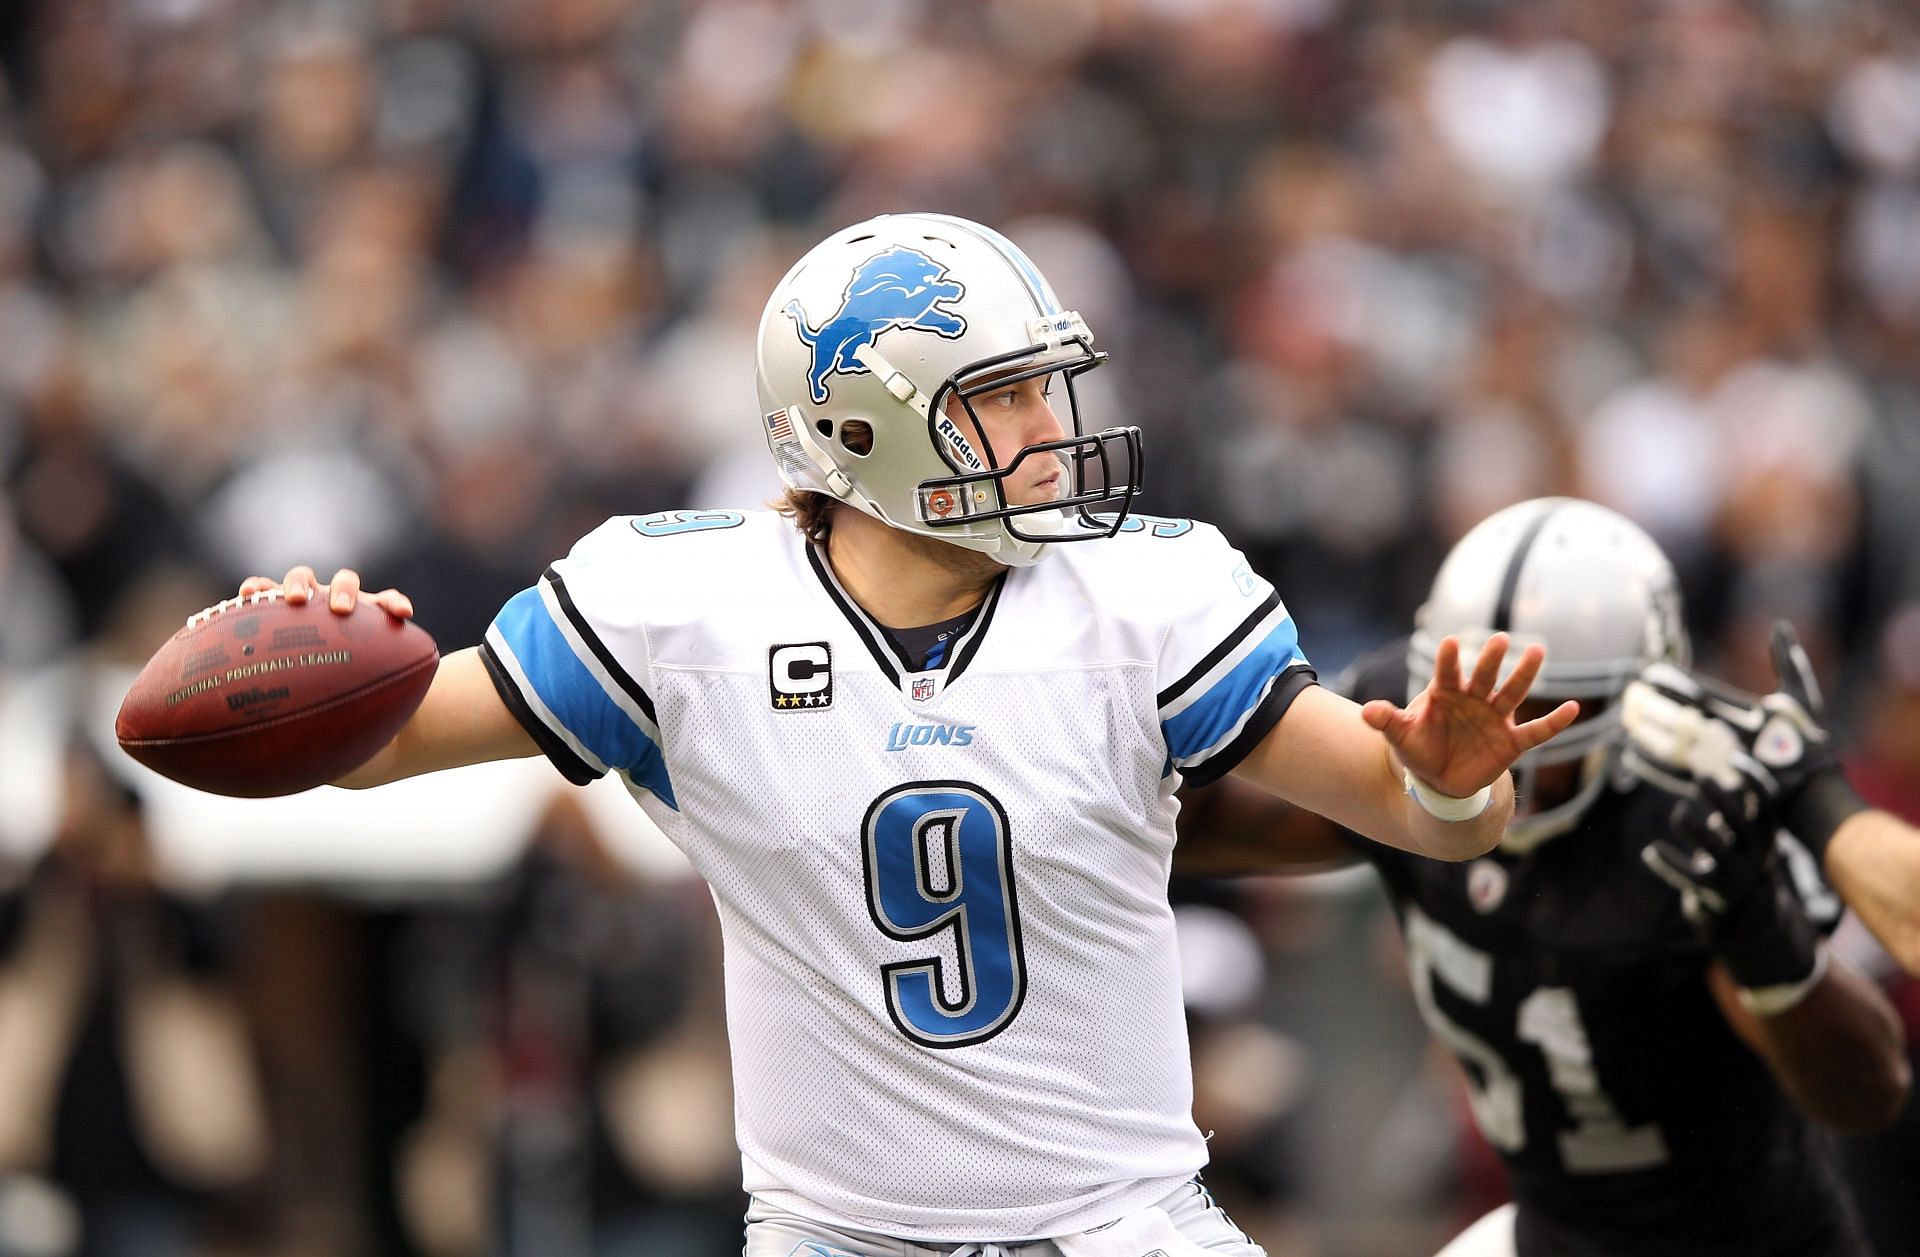 Matthew Stafford led the Detroit Lions to the playoffs during the 2011 season.